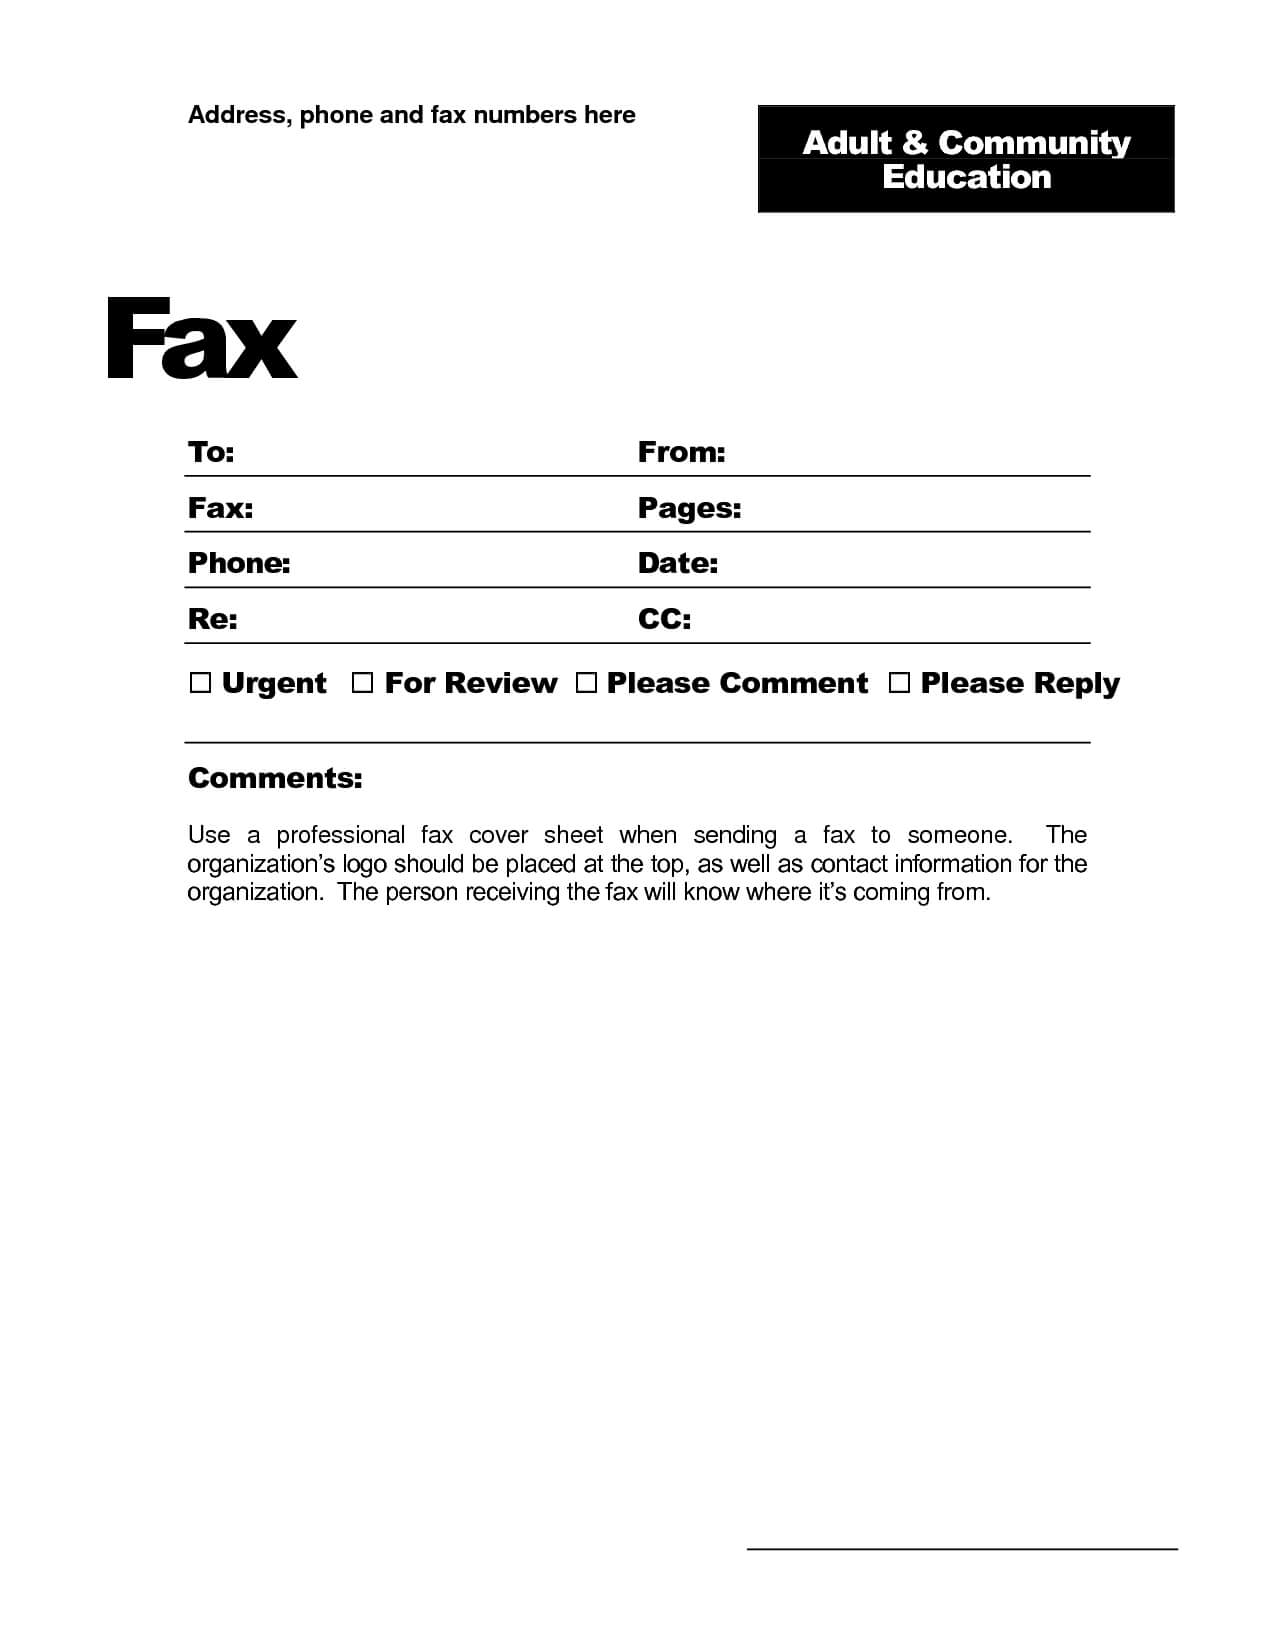 Fax Template Word 2010 – Free Download For Fax Template Word 2010